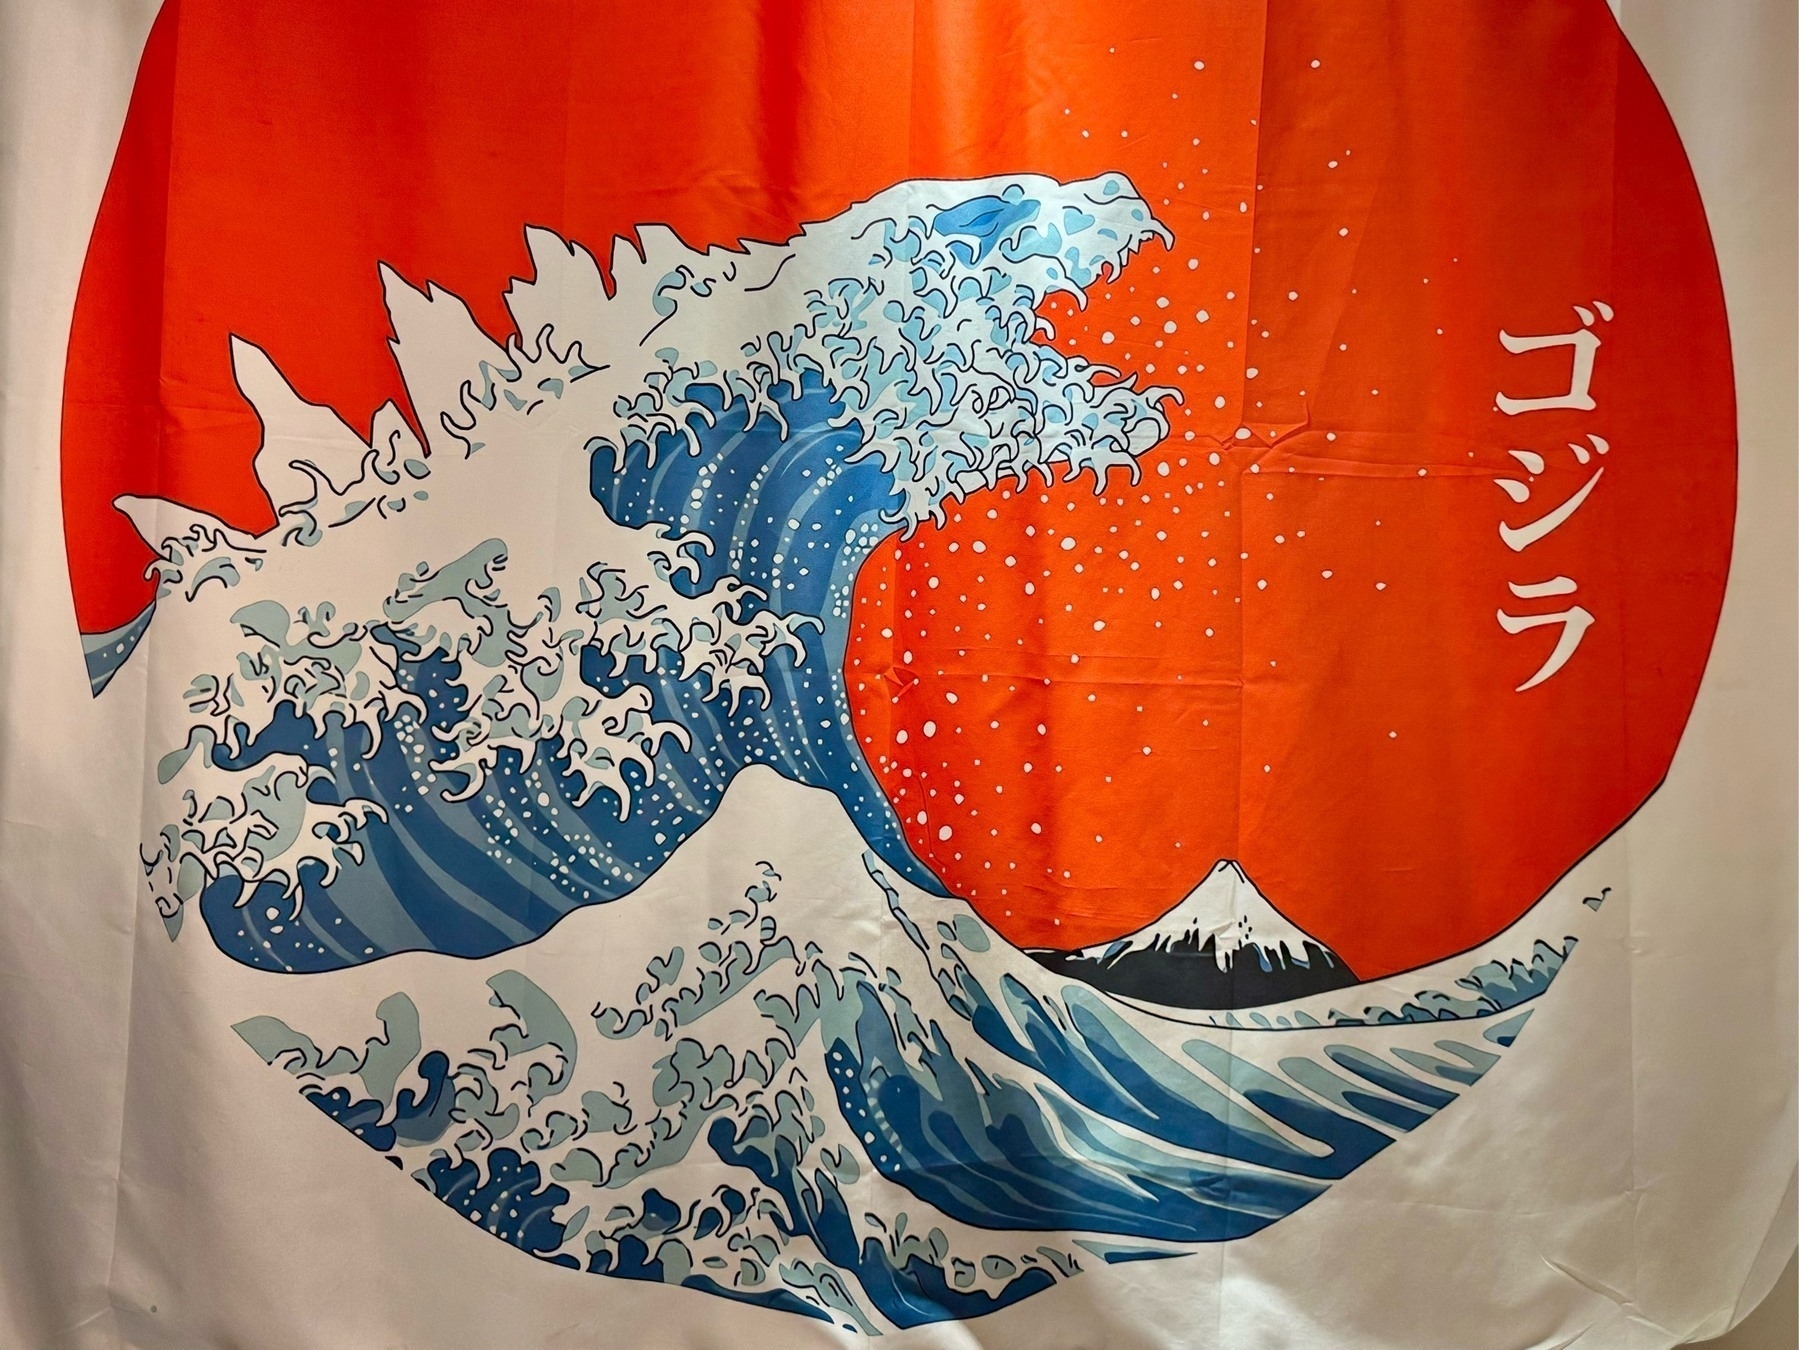 A white flag with a huge red circle in the middle, in which is a painting representative of Hokusai's "The Great Wave off Kanagawa", but with the wave shaped like Godzilla. Labelled with the name "Godzilla" in Japanese.